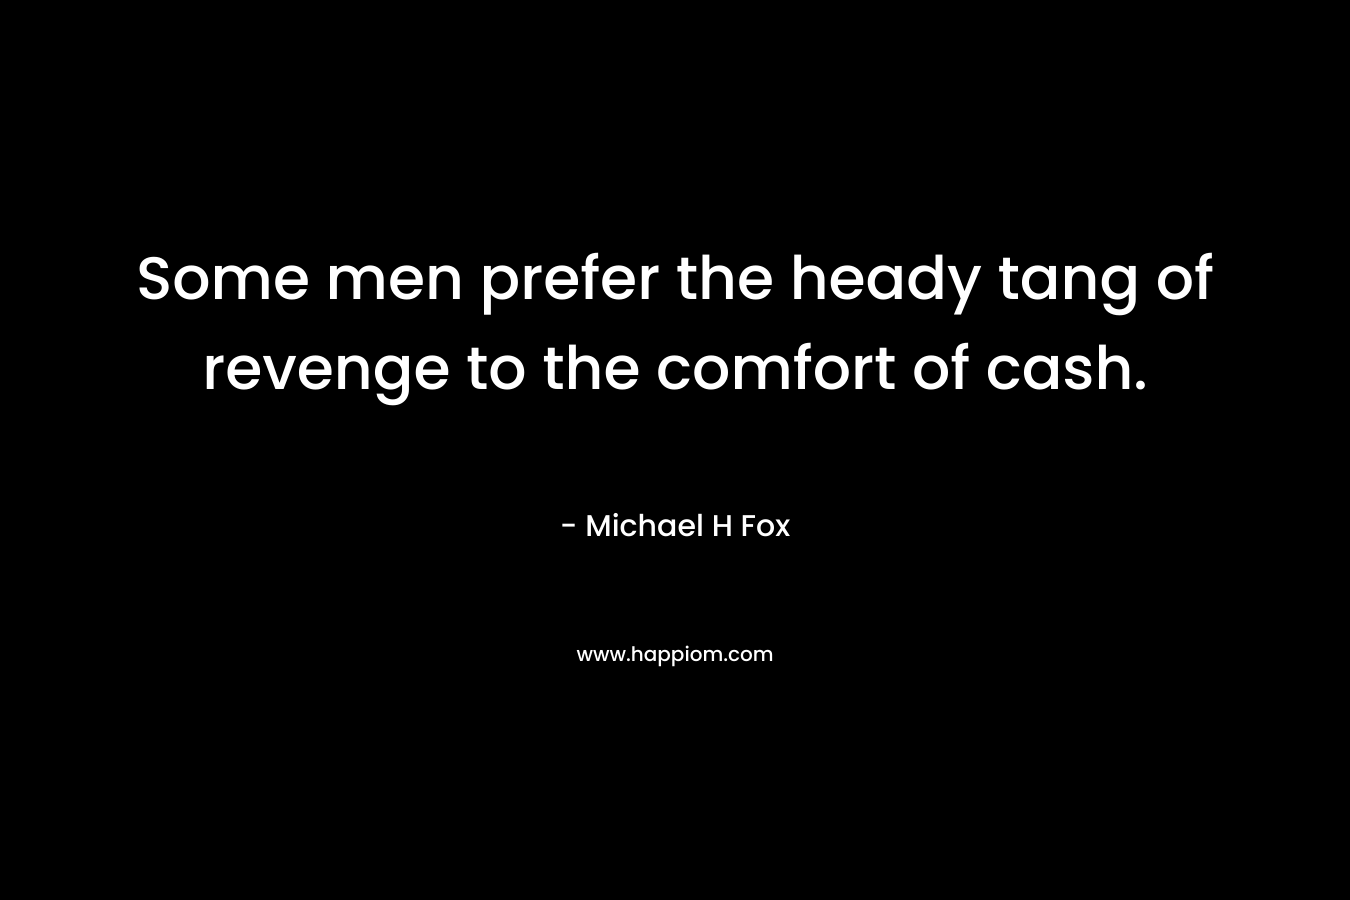 Some men prefer the heady tang of revenge to the comfort of cash. – Michael H Fox